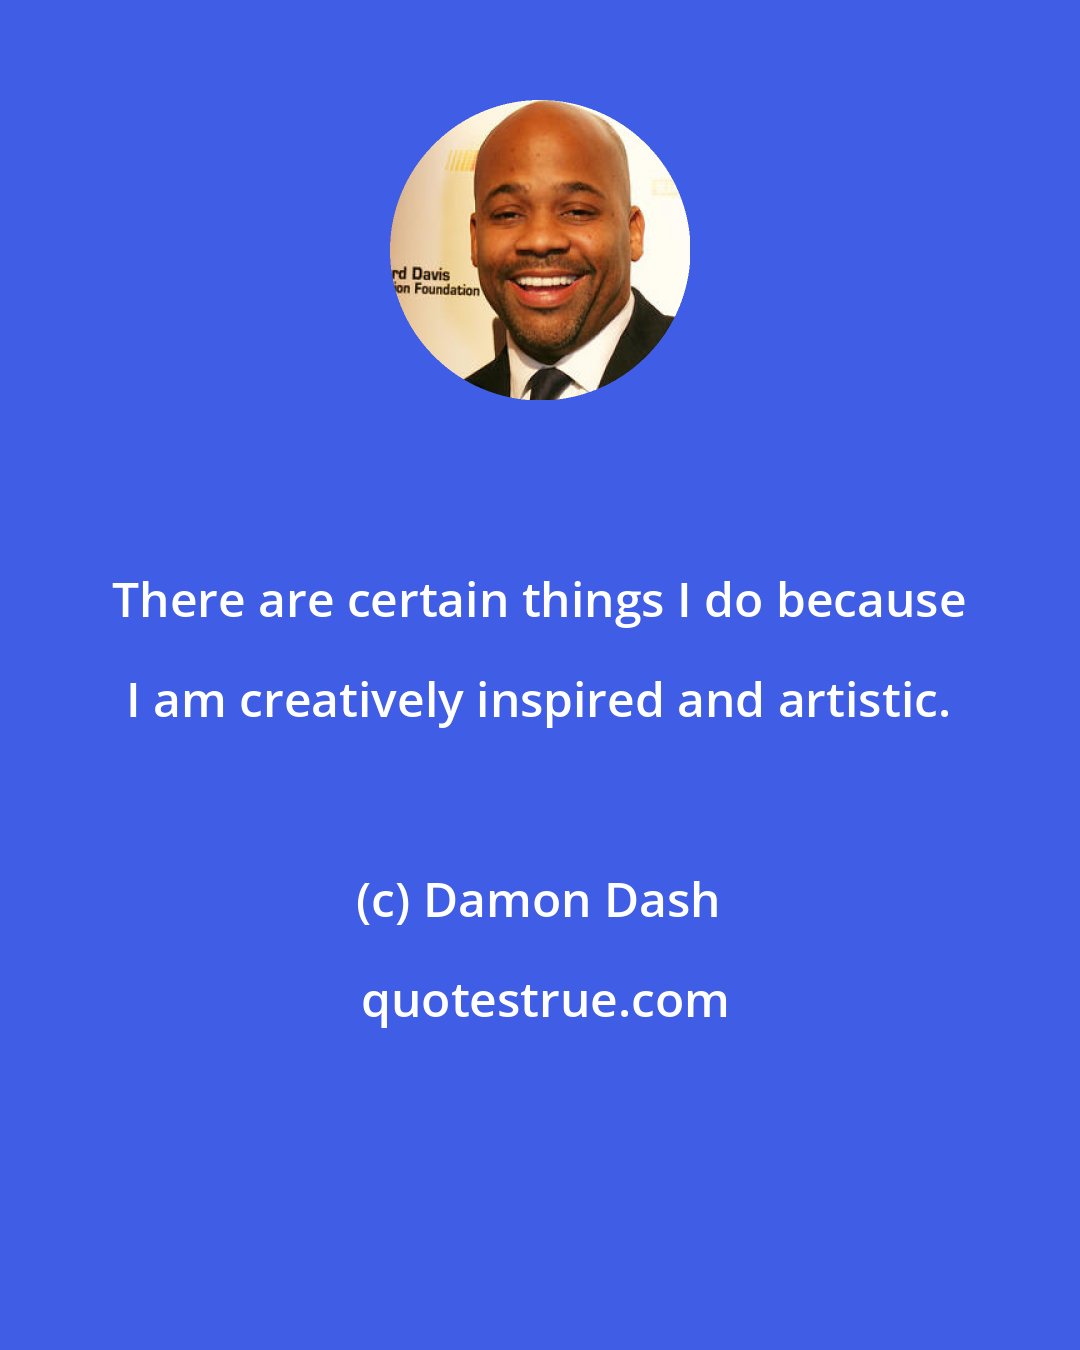 Damon Dash: There are certain things I do because I am creatively inspired and artistic.